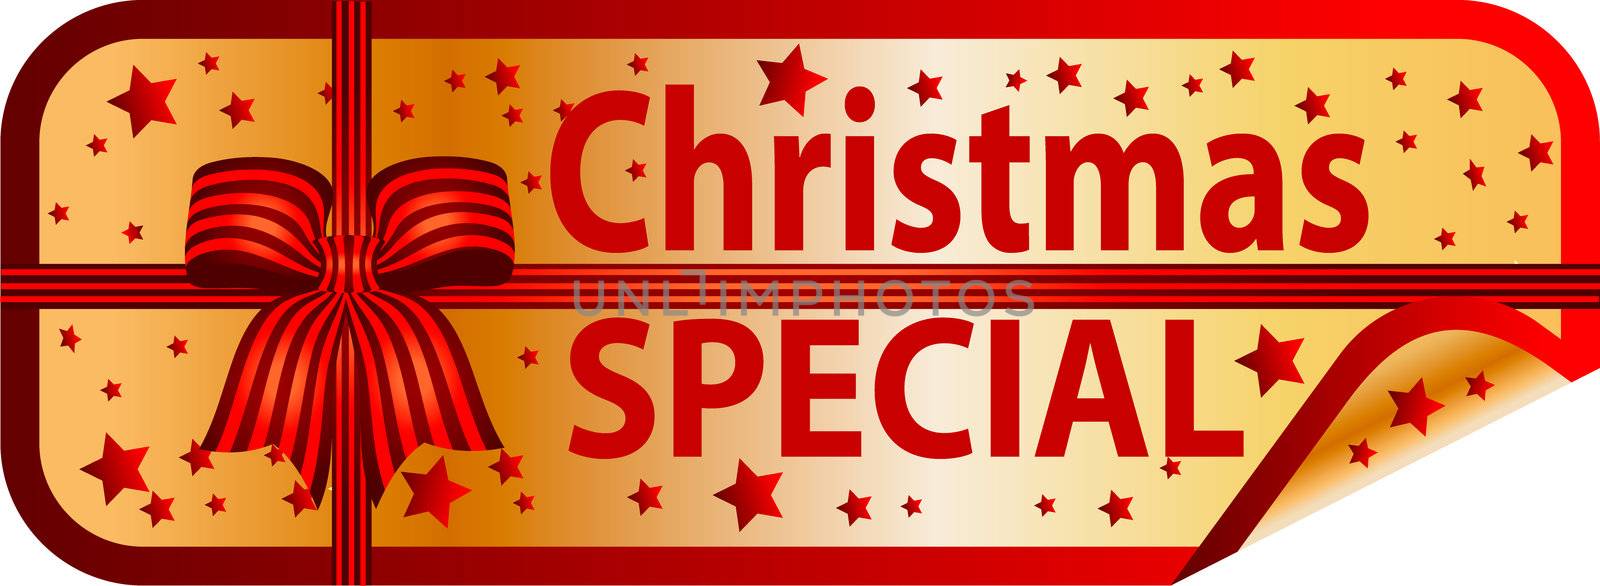 Button Christmas Special by peromarketing